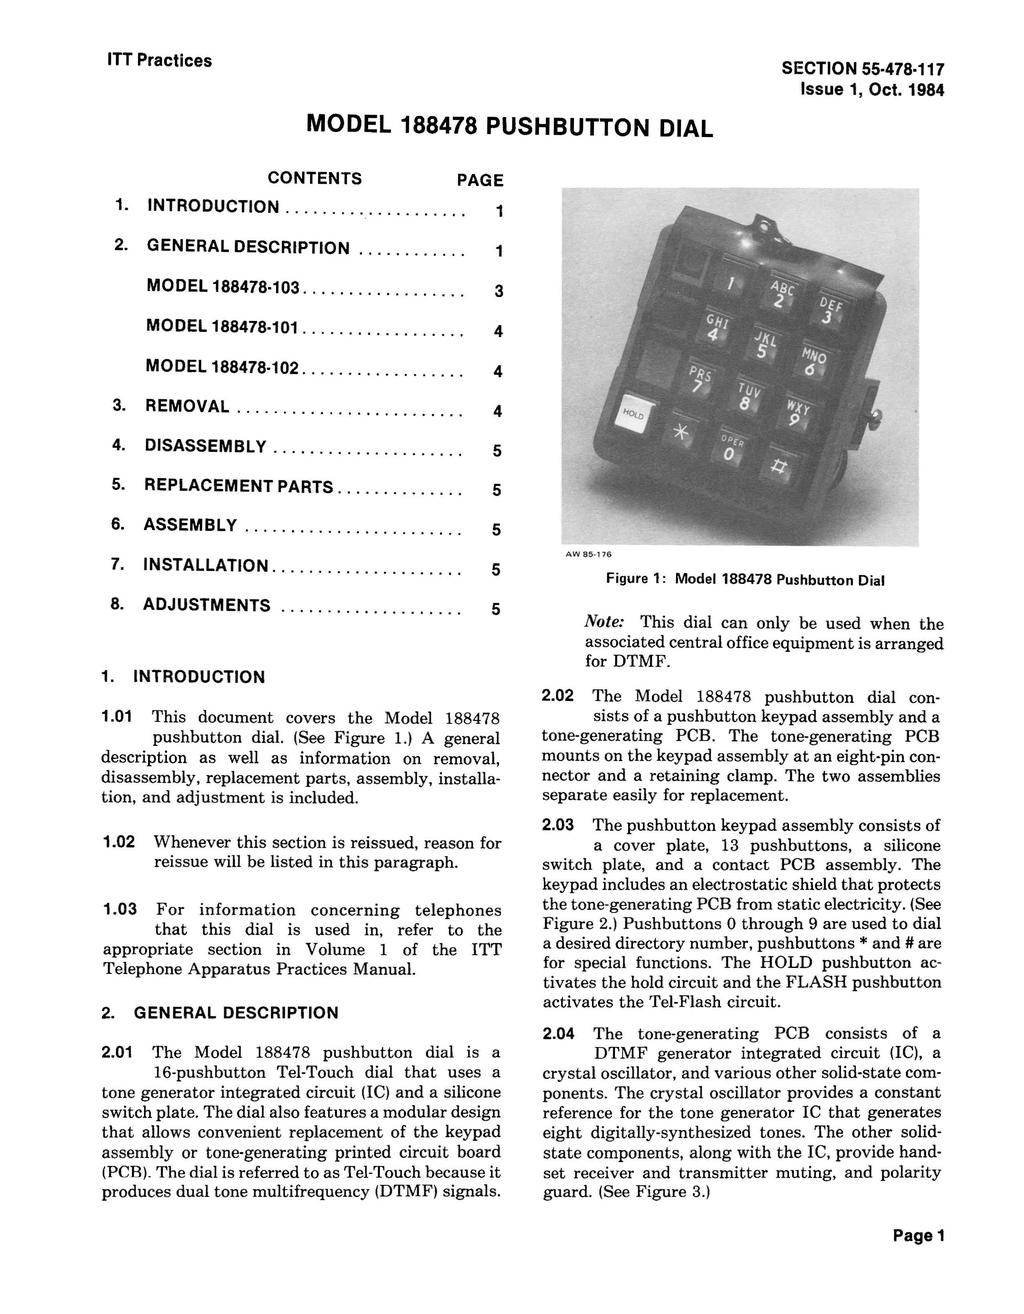 ITT Practices MODEL 188478 PUSHBUTTON DIAL SECTION 478 117 Issue 1, Oct. 1984 CONTENTS PAGE 1. INTRODUCTION... 1 2. GENERAL DESCRIPTION............ 1 MODEL 188478 103. MODEL 188478 101.